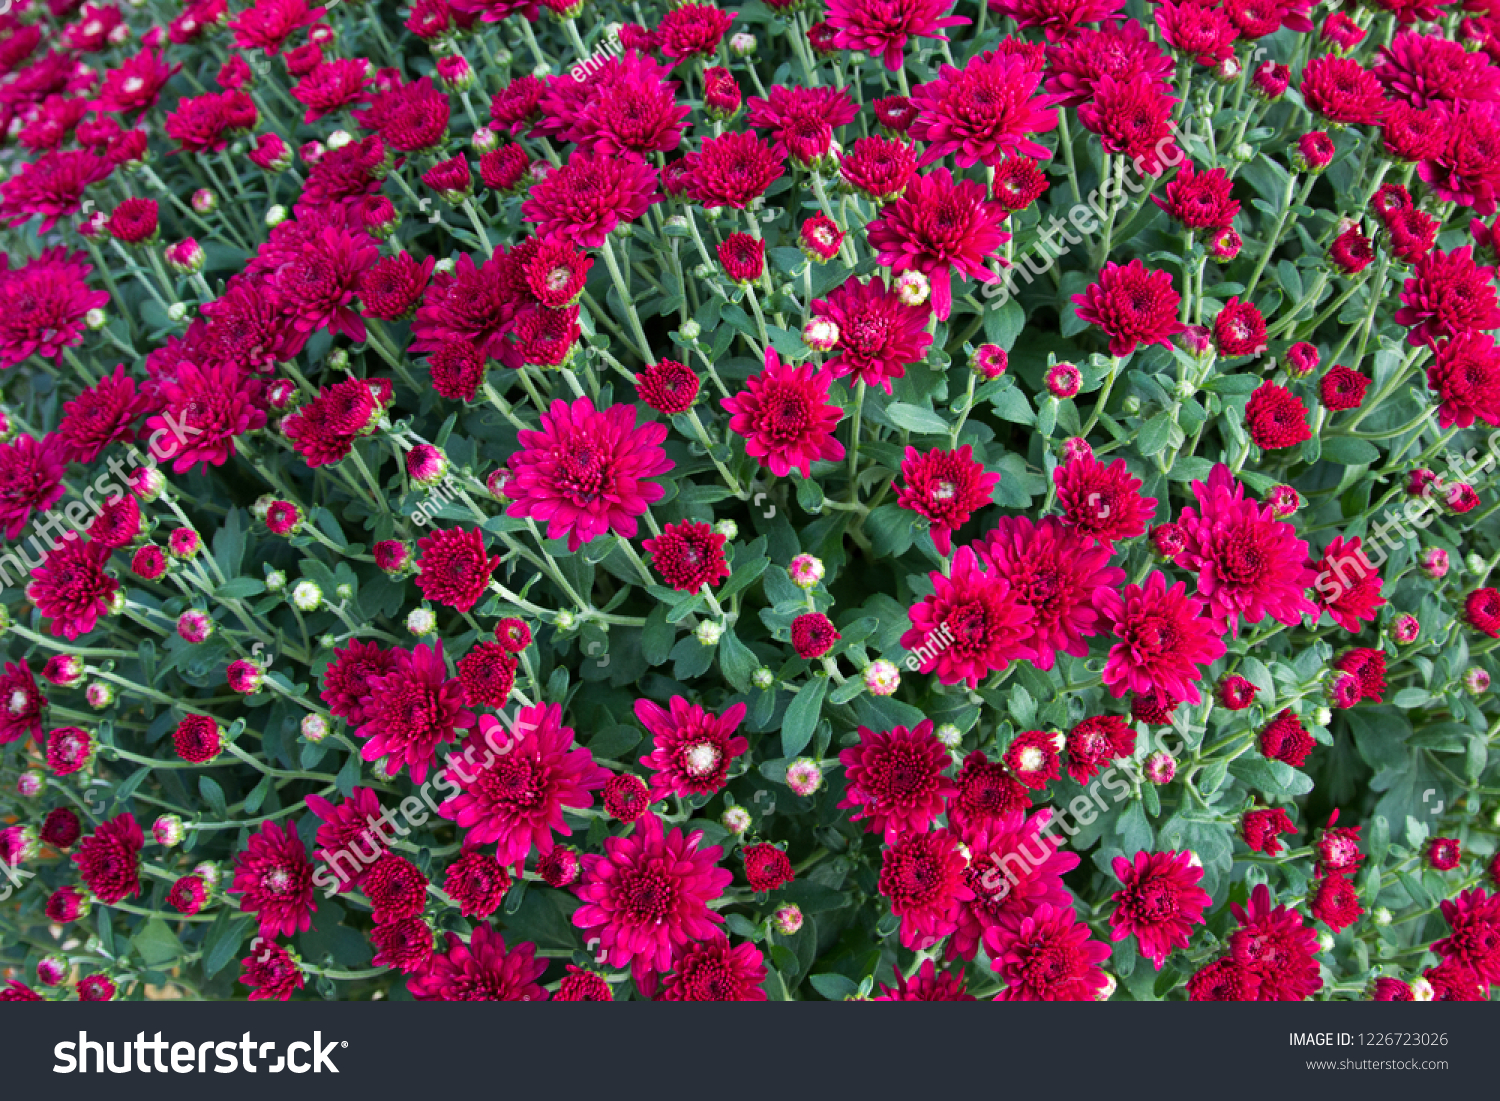 Bright Bouquet Of Chrysanthemums. Beautiful close up of fall Chrysanthemum. Also known as mums, the flowering annual is hardy in cooler weather. Making it popular in autumn for gardens and decor.  #1226723026